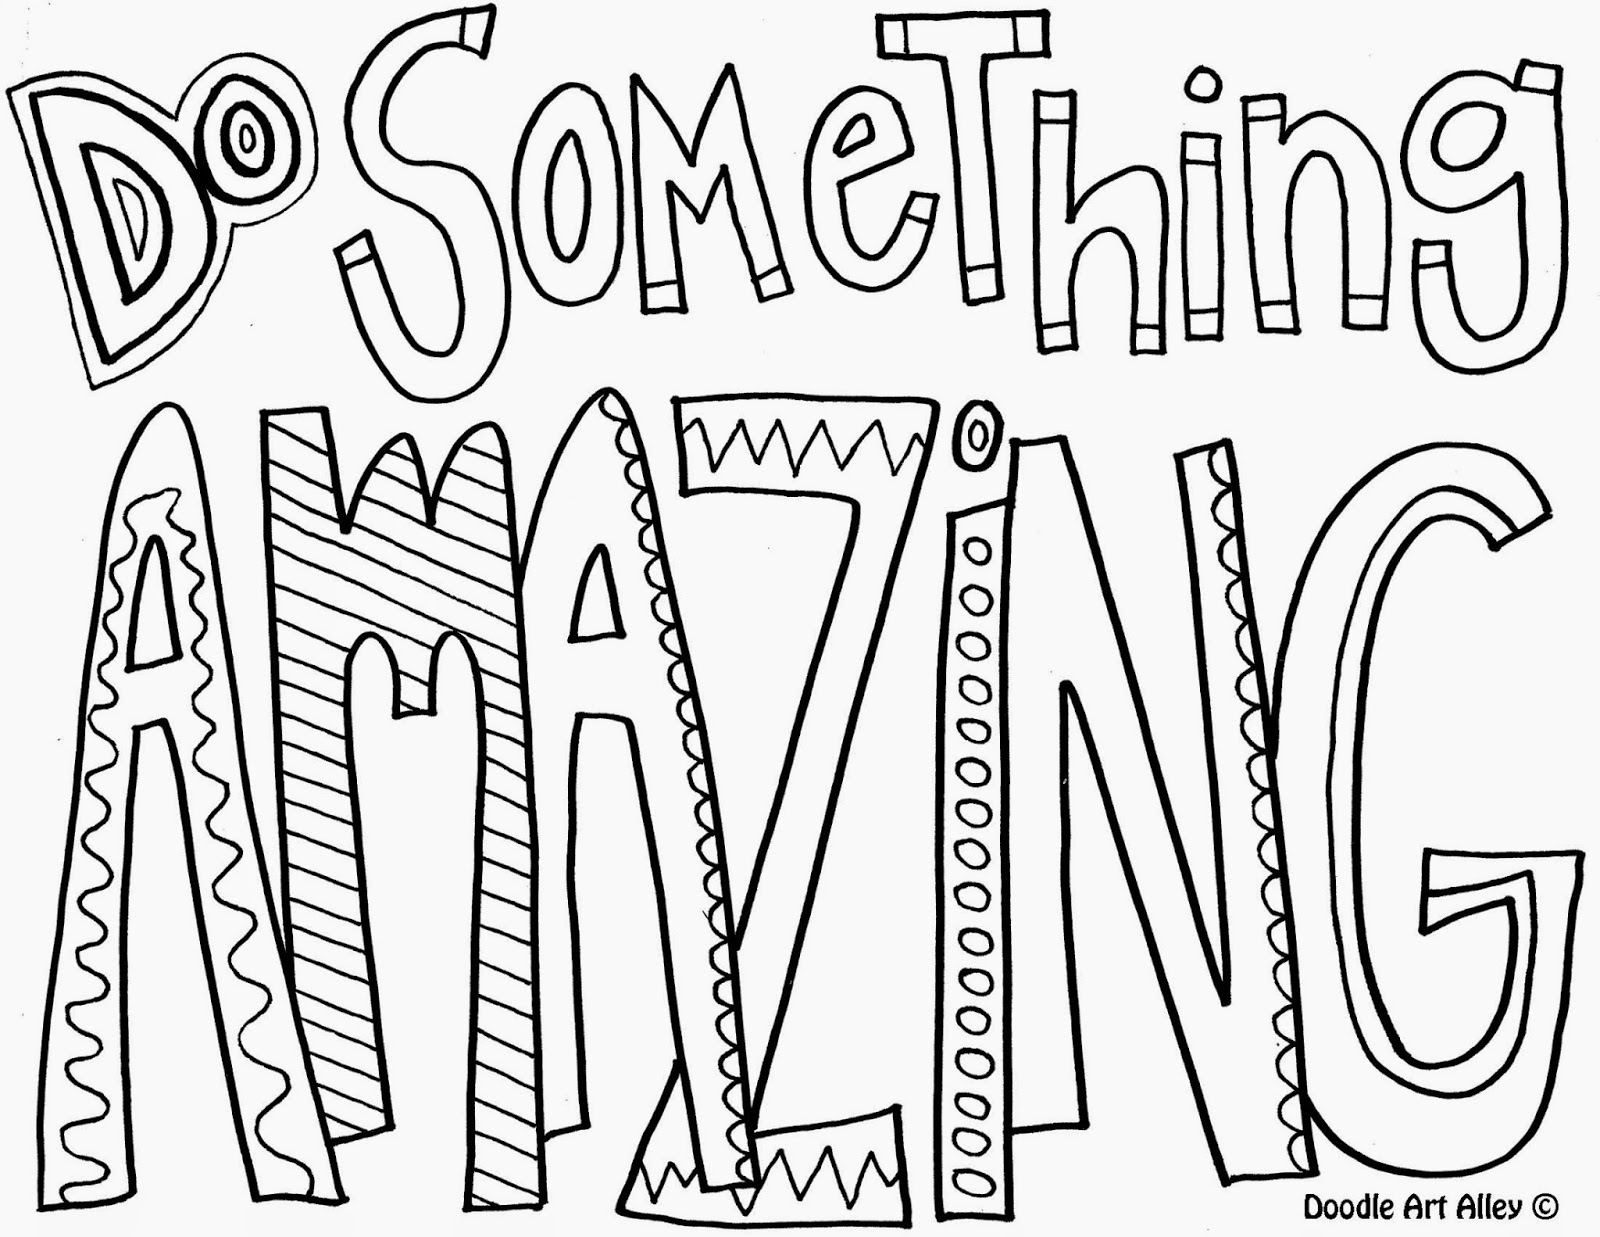 Do something amazing - Quote Coloring Pages